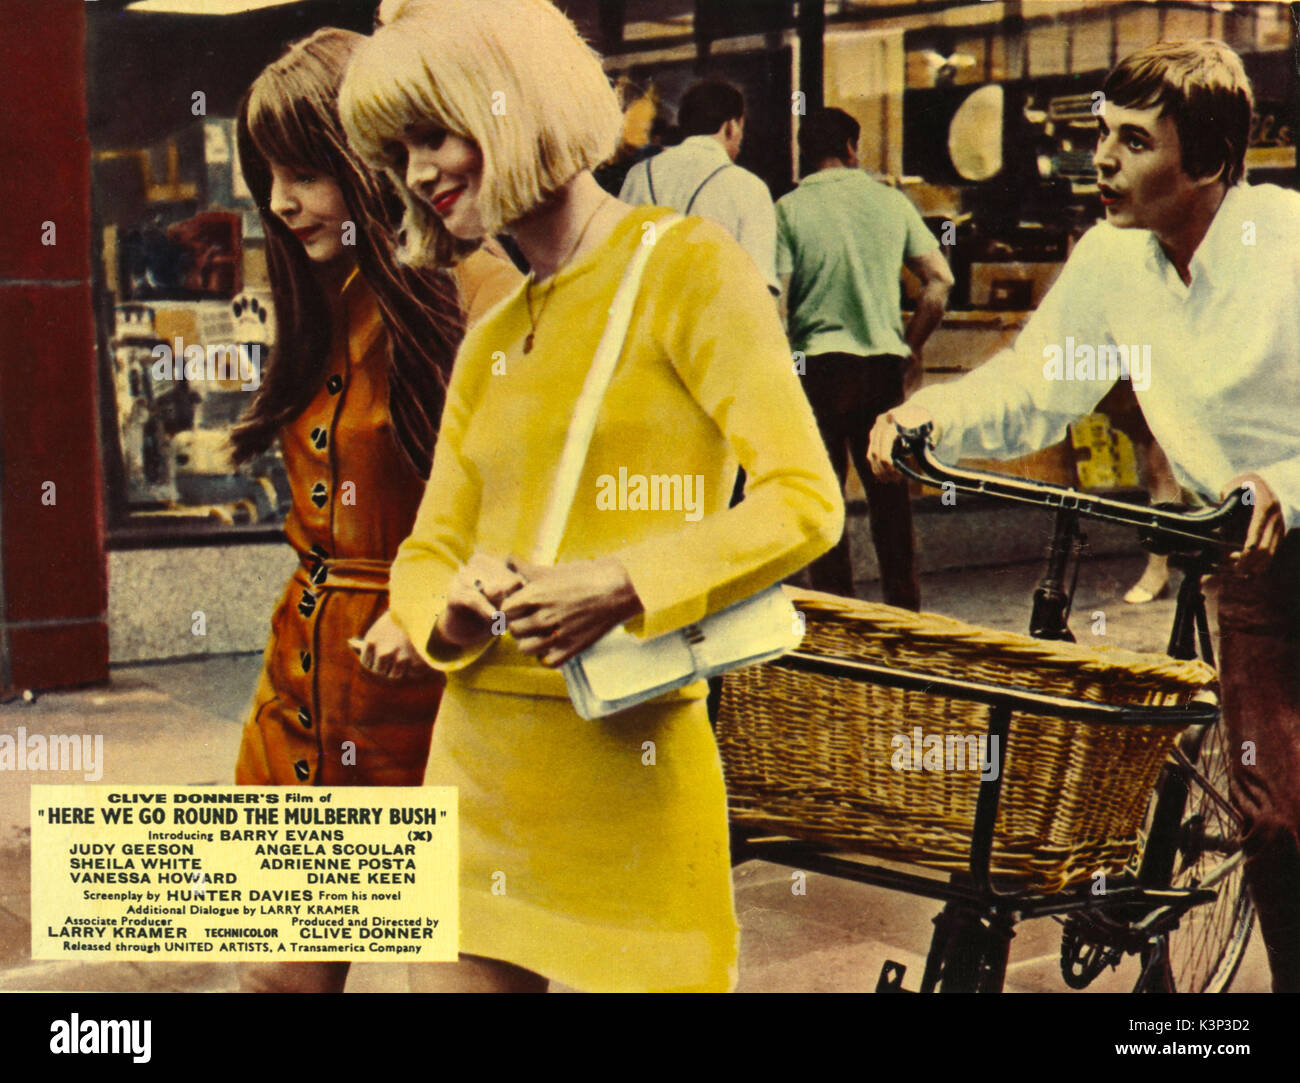 HERE WE GO ROUND DEL MULBERRY BUSH [BR 1967] DIANE KEEN, JUDY GEESON, BARRY EVANS data: 1967 Foto Stock